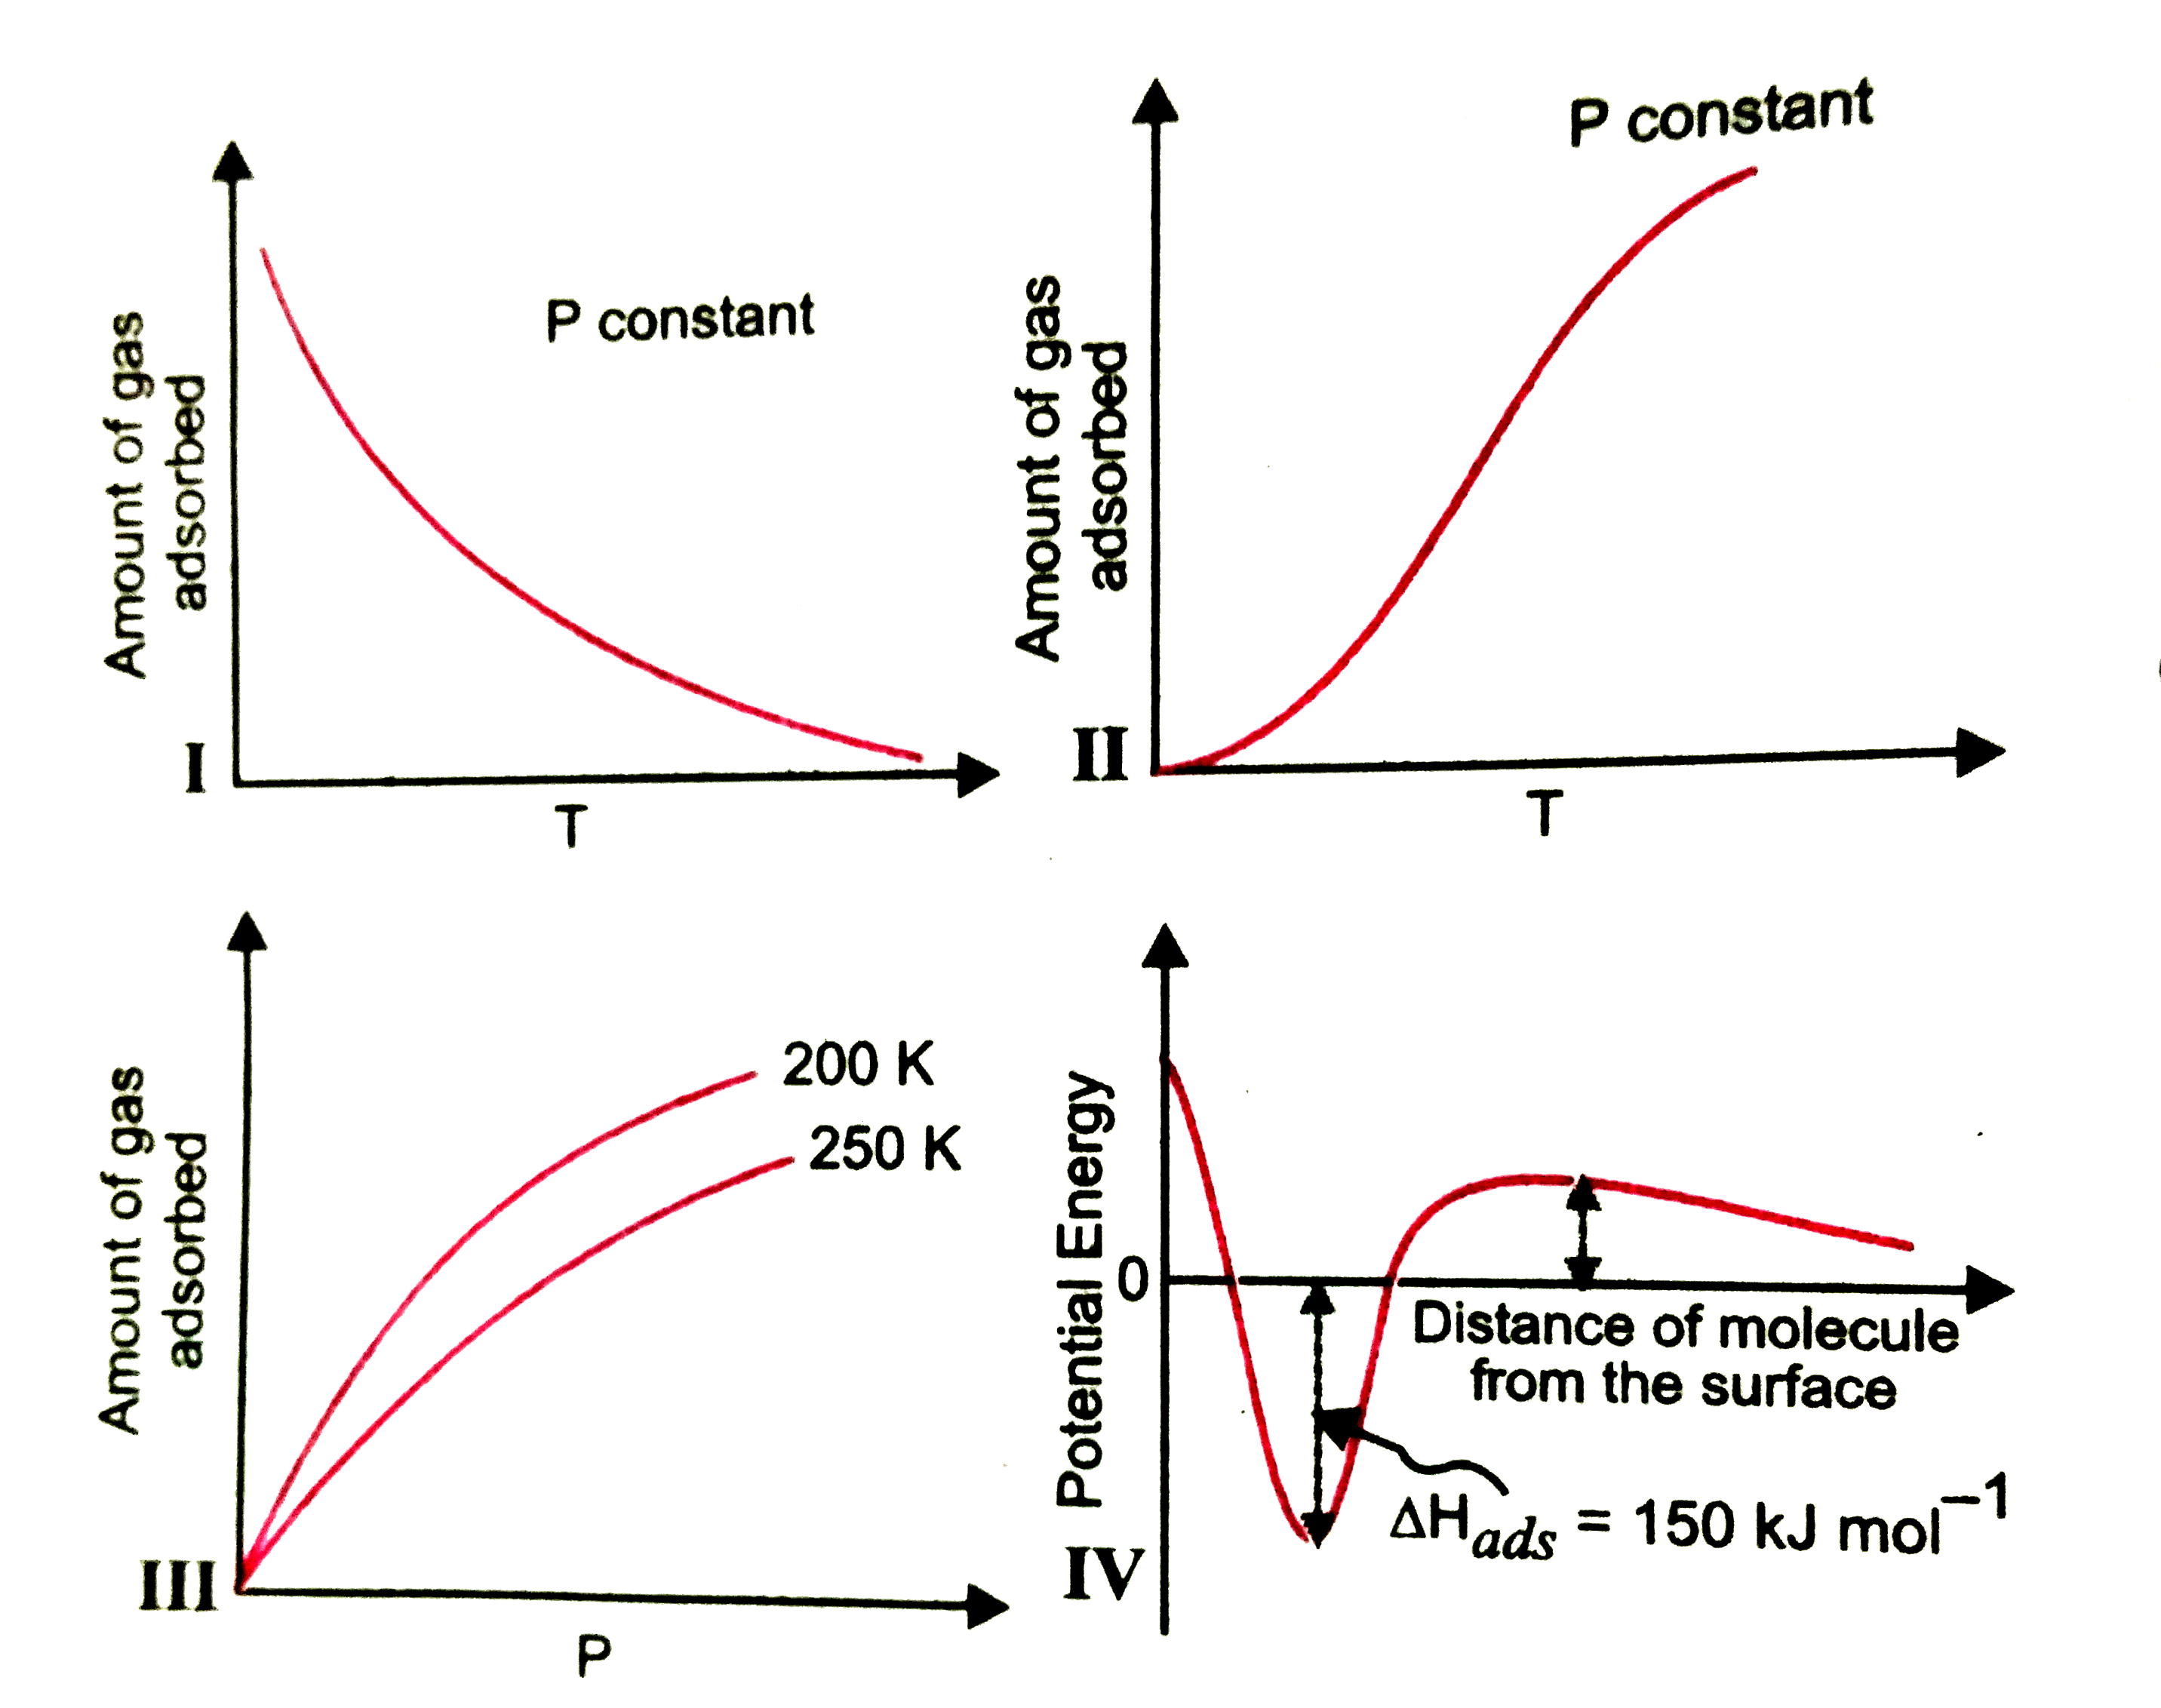 The given graphs/data I, II, III and IV represent general trends observed for different physisorption and chemisorption processes under mild conditions of temperature and pressure. Which of the following choice (s) about I, II, III and IV is (are) correct